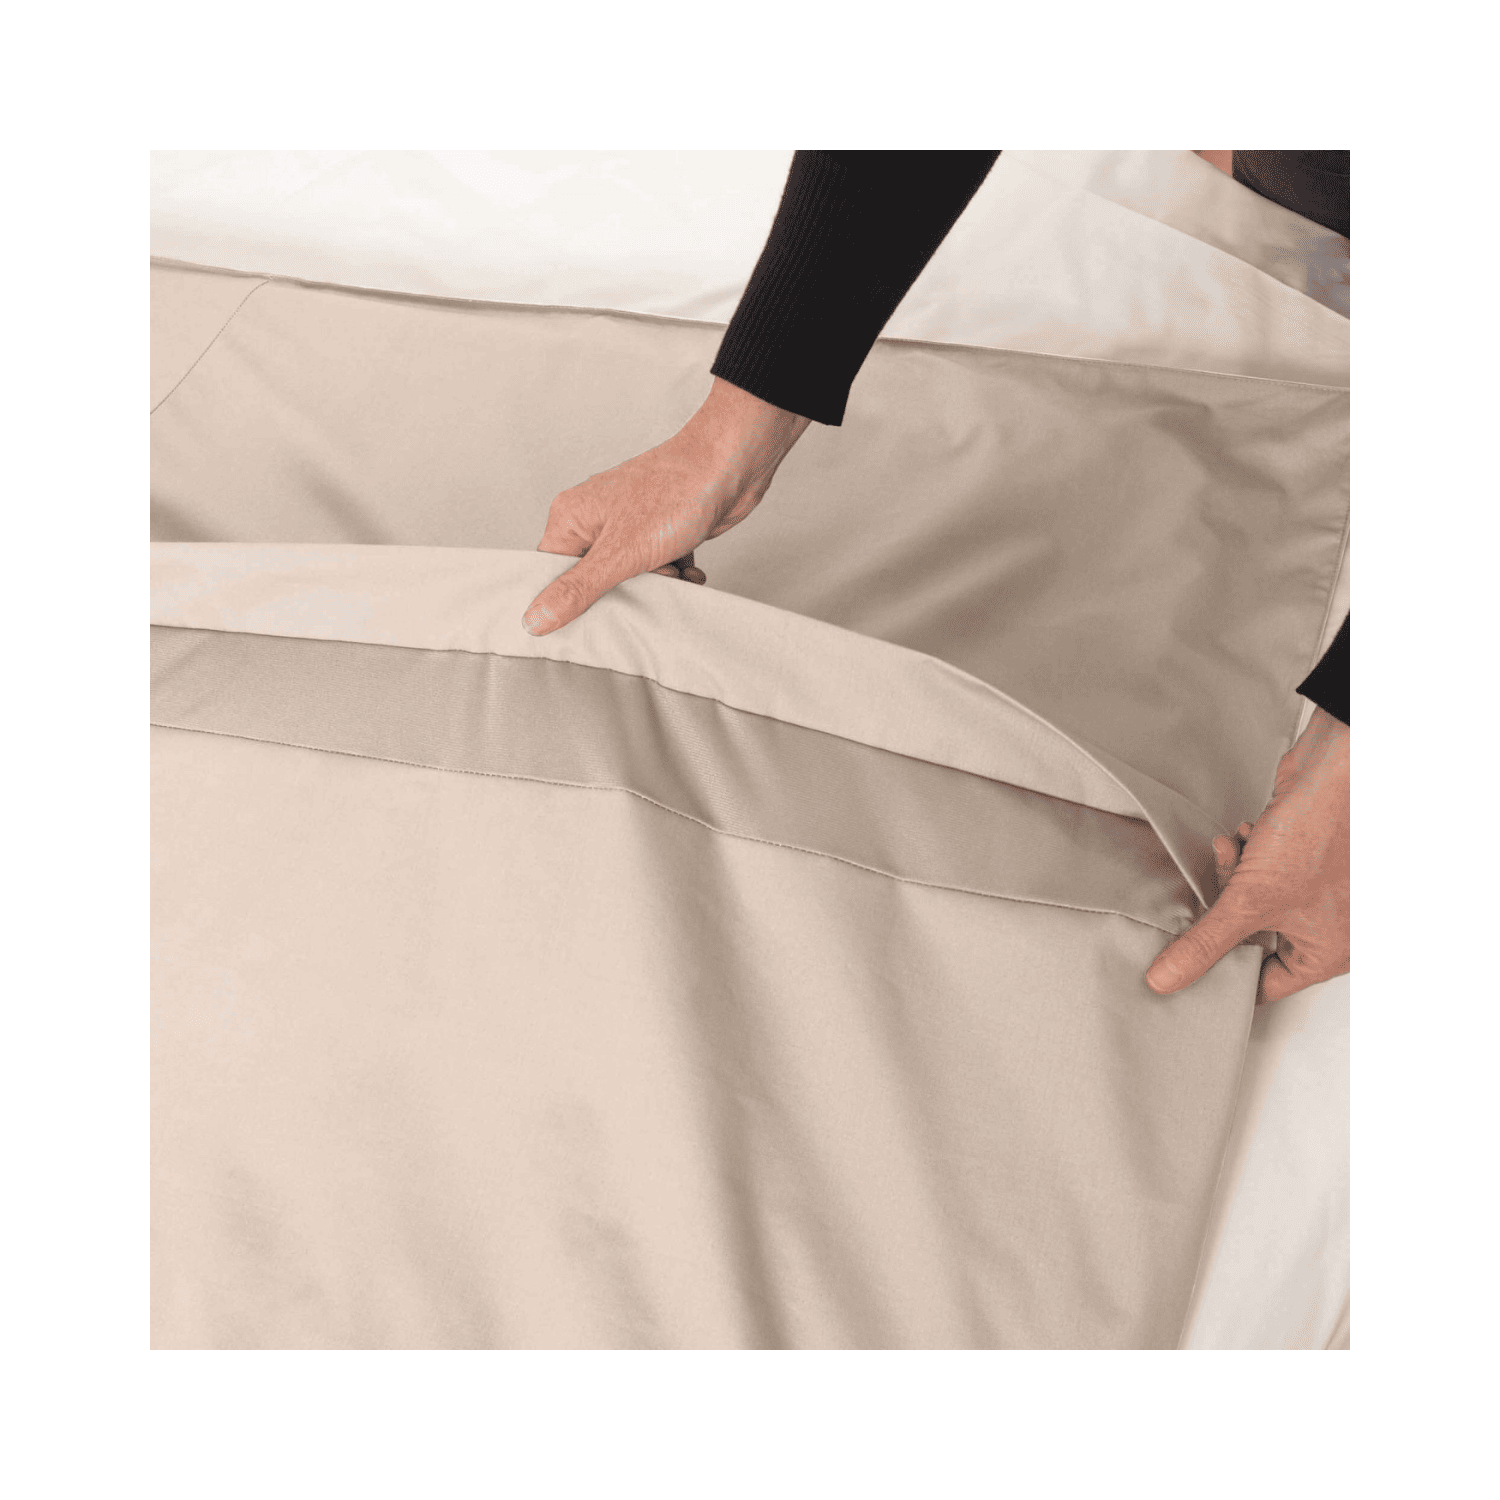 Conni Waterproof Quilt Cover - Ivory+